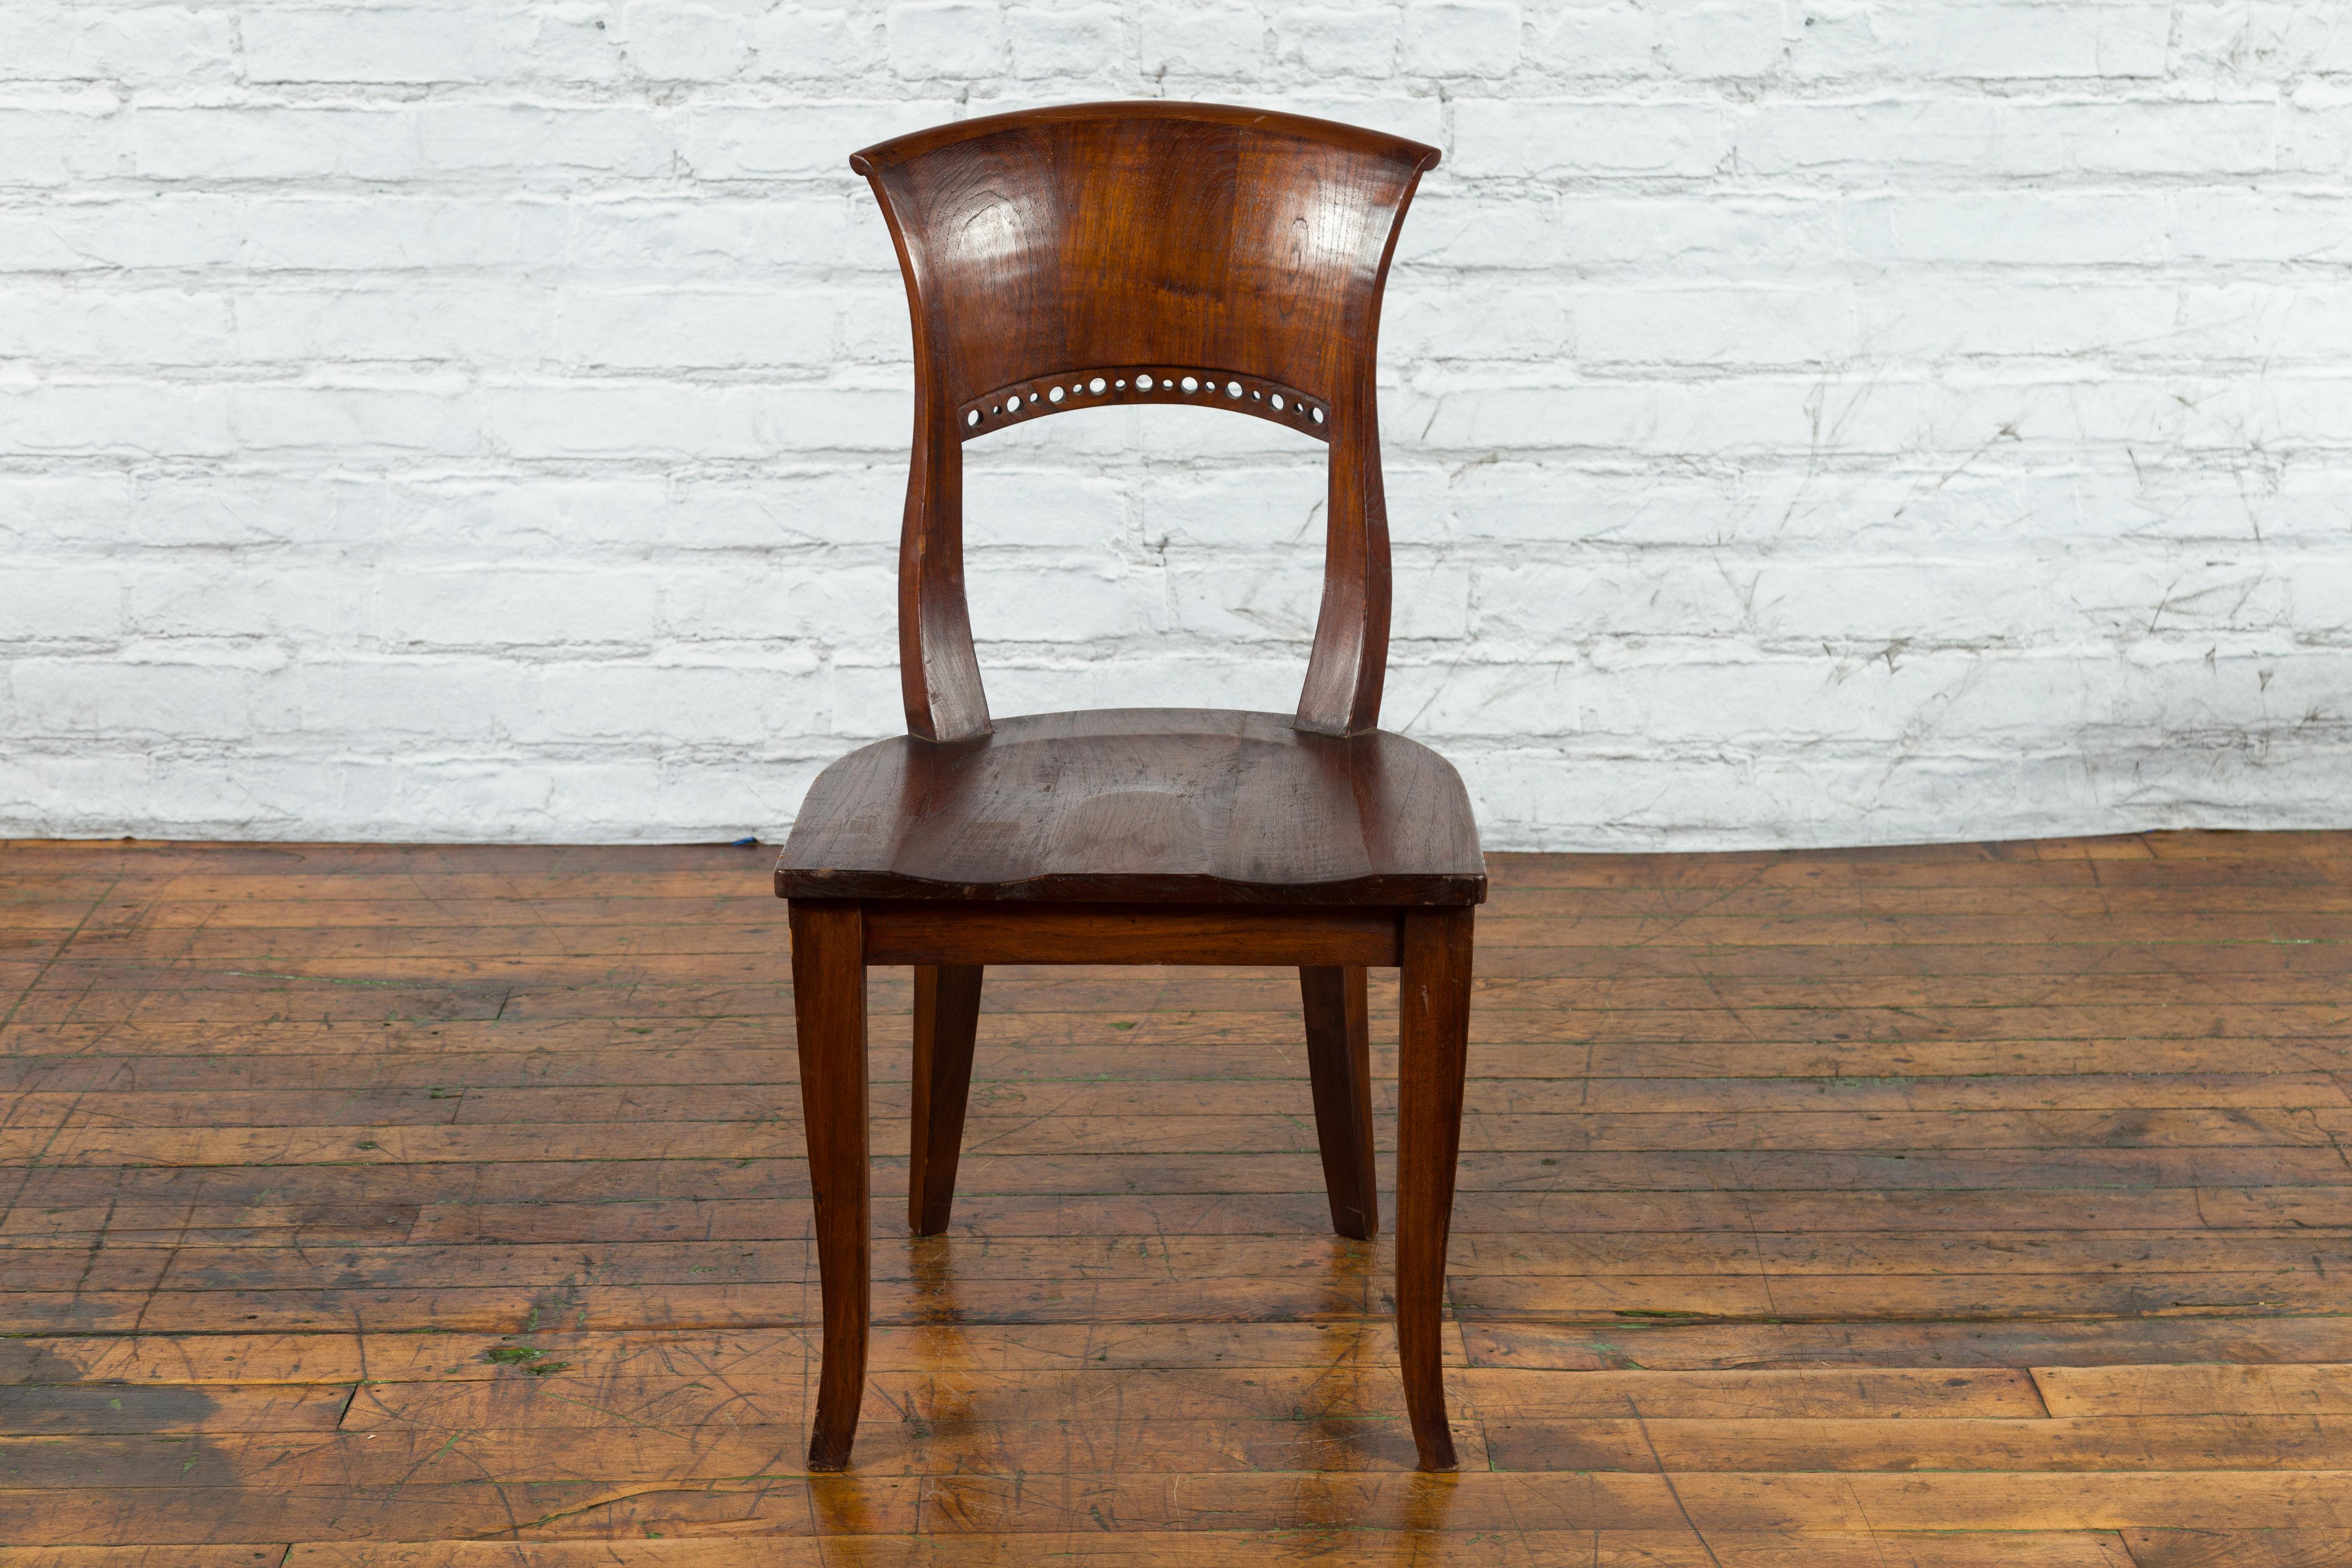 A vintage Indonesian wooden chair from the mid 20th century with pierced circular motifs. Created in Indonesia during the Midcentury period, this wooden chair features a curving back with out-scrolling upper rail and pierced circular motifs,